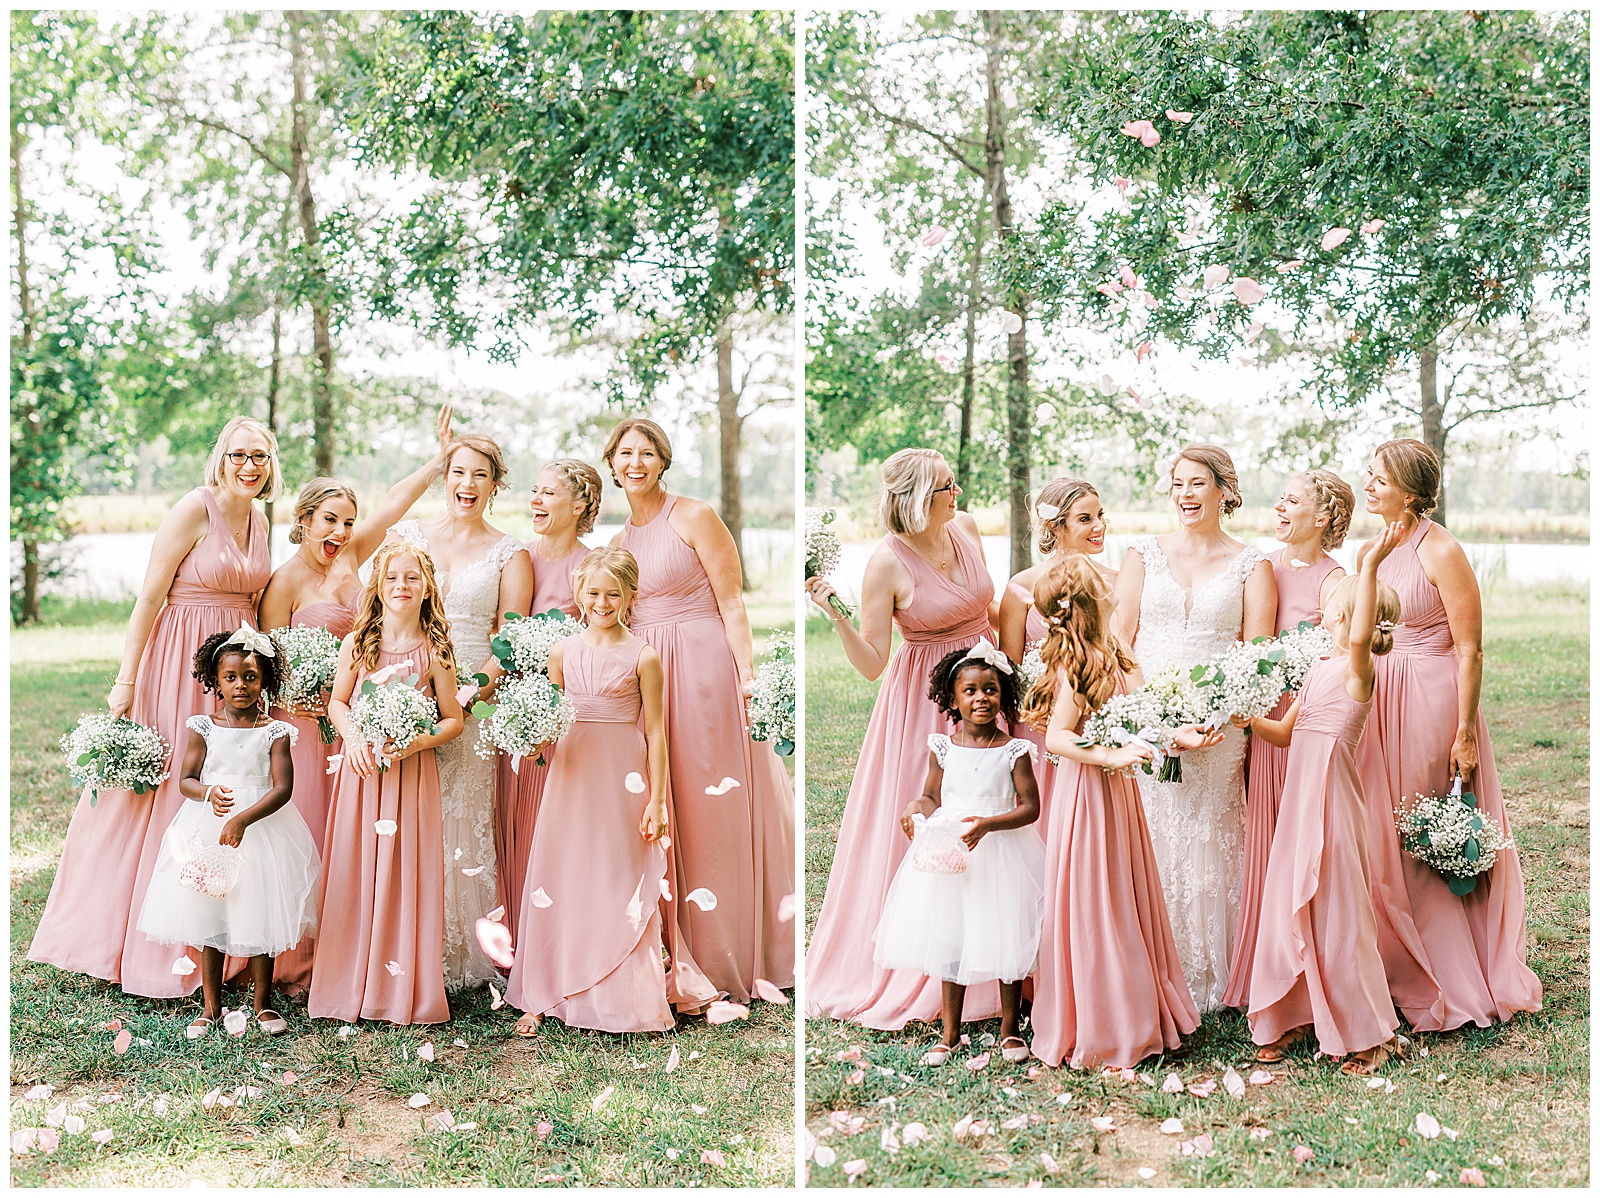 tossing petals in the air for sweet pink bride tribe portraits for outdoor summer wedding